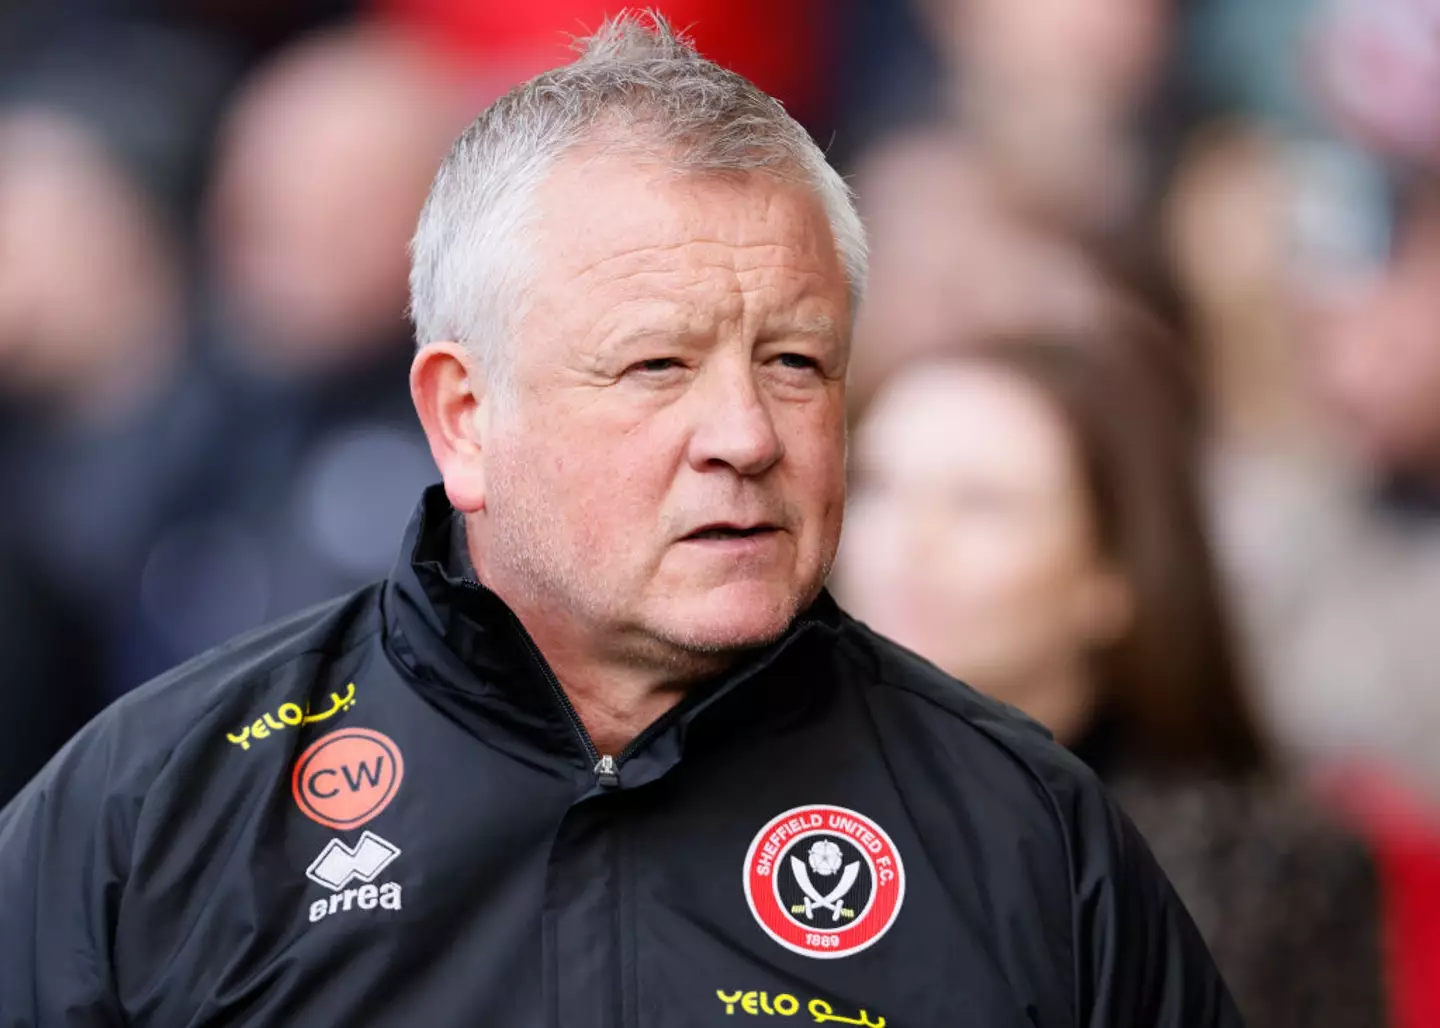 Chris Wilder's Sheffield United are currently bottom of the Premier League (Image: Getty)